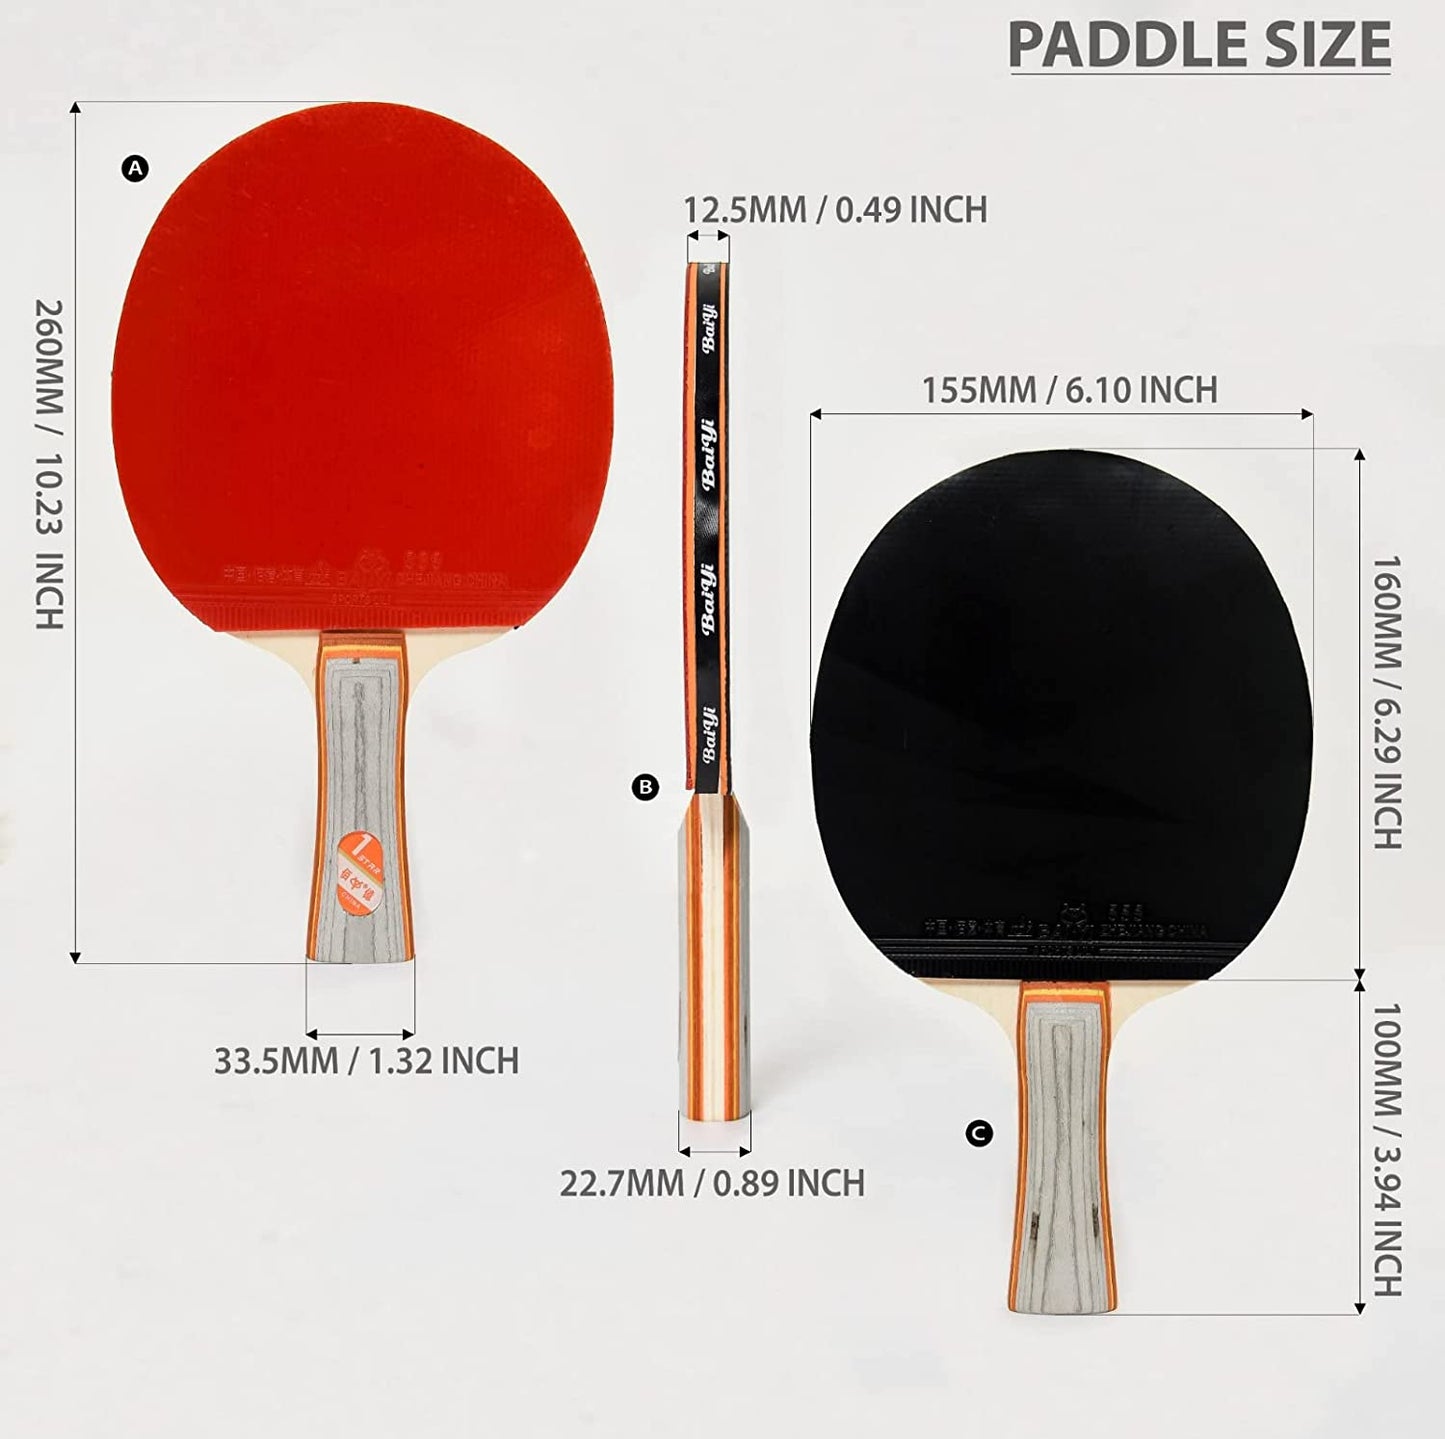 SKY LAND EM-9354 Sports Table Tennis Racket 3.0 |Ping Pong Racket & Case, Professional TT Paddle For Beginners And Intermediate Players - COOLBABY